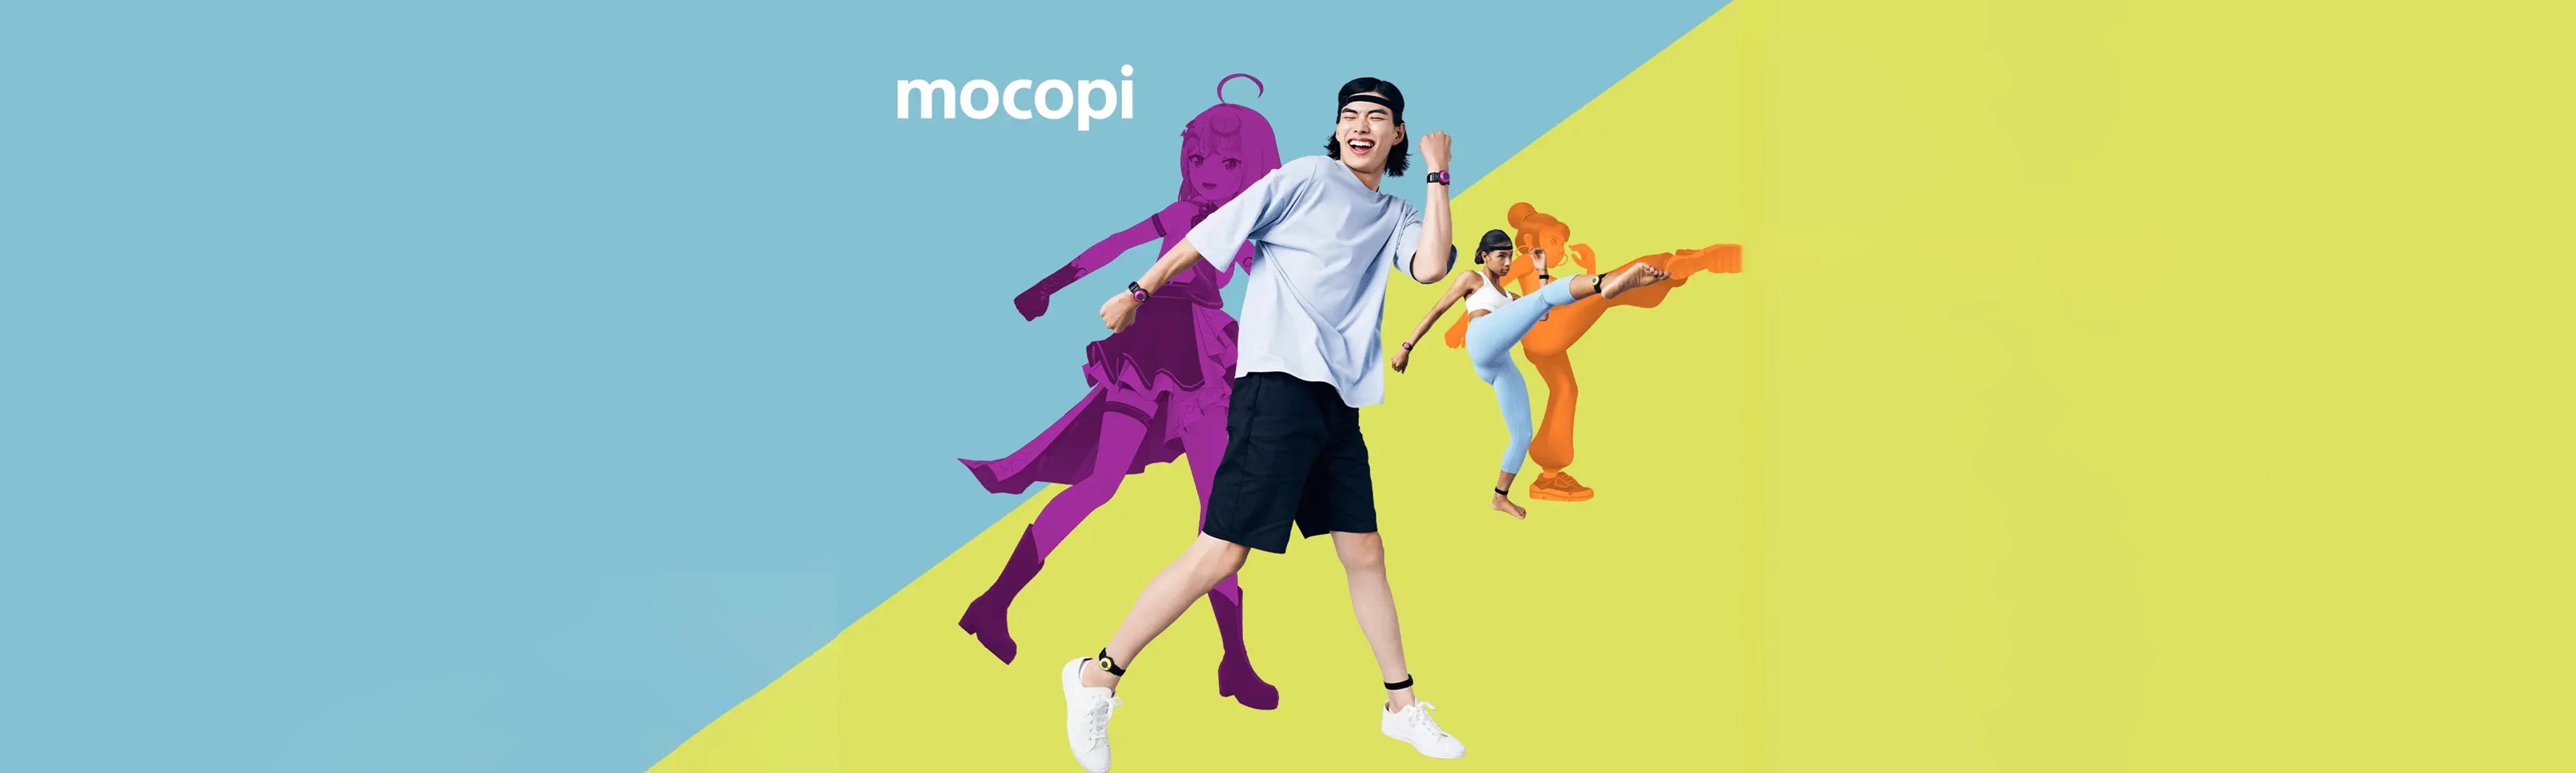 Sony Mocopi in the US: A New Dimension in VR Motion Capture